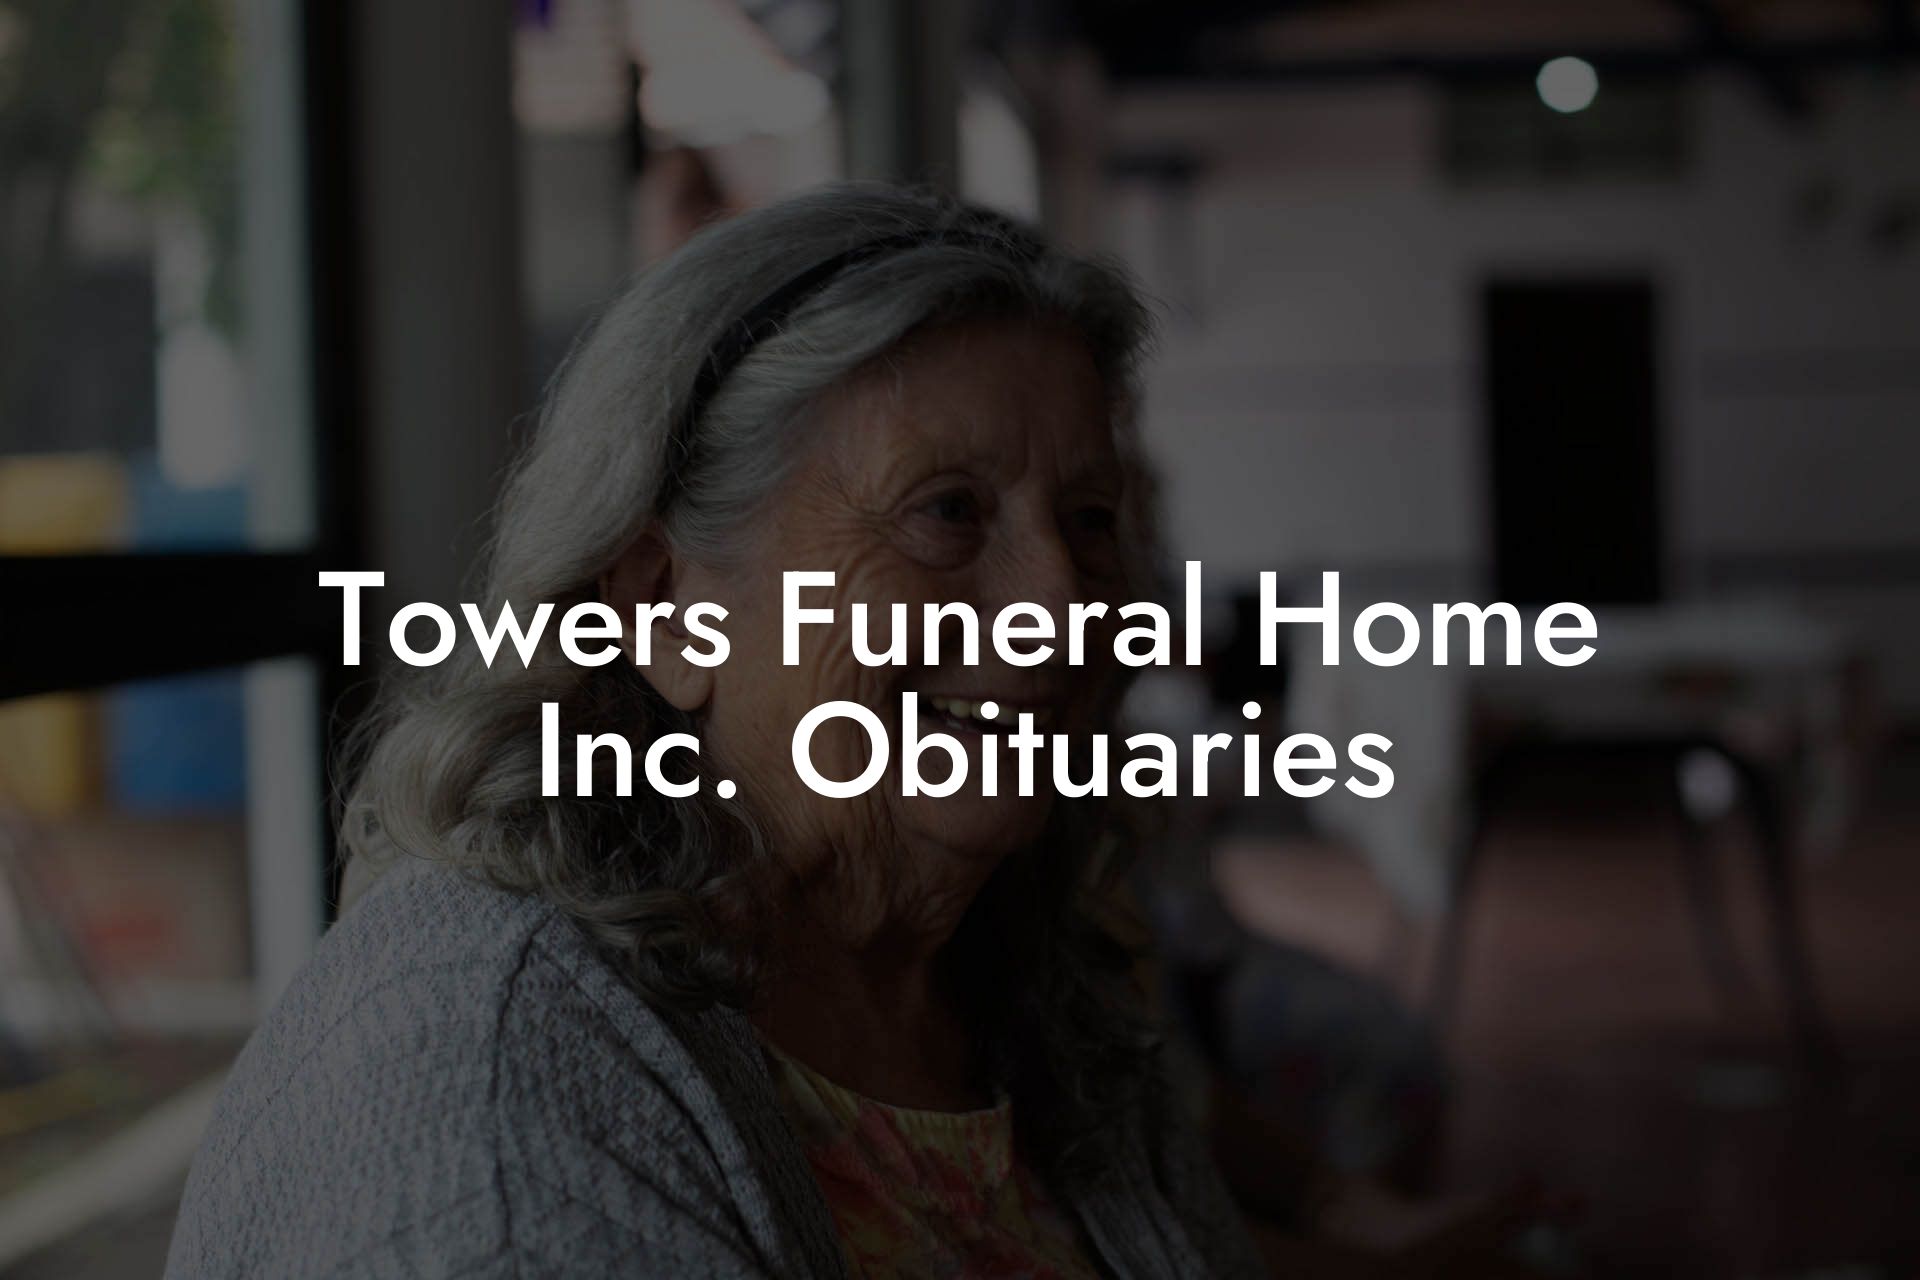 Towers Funeral Home Inc. Obituaries